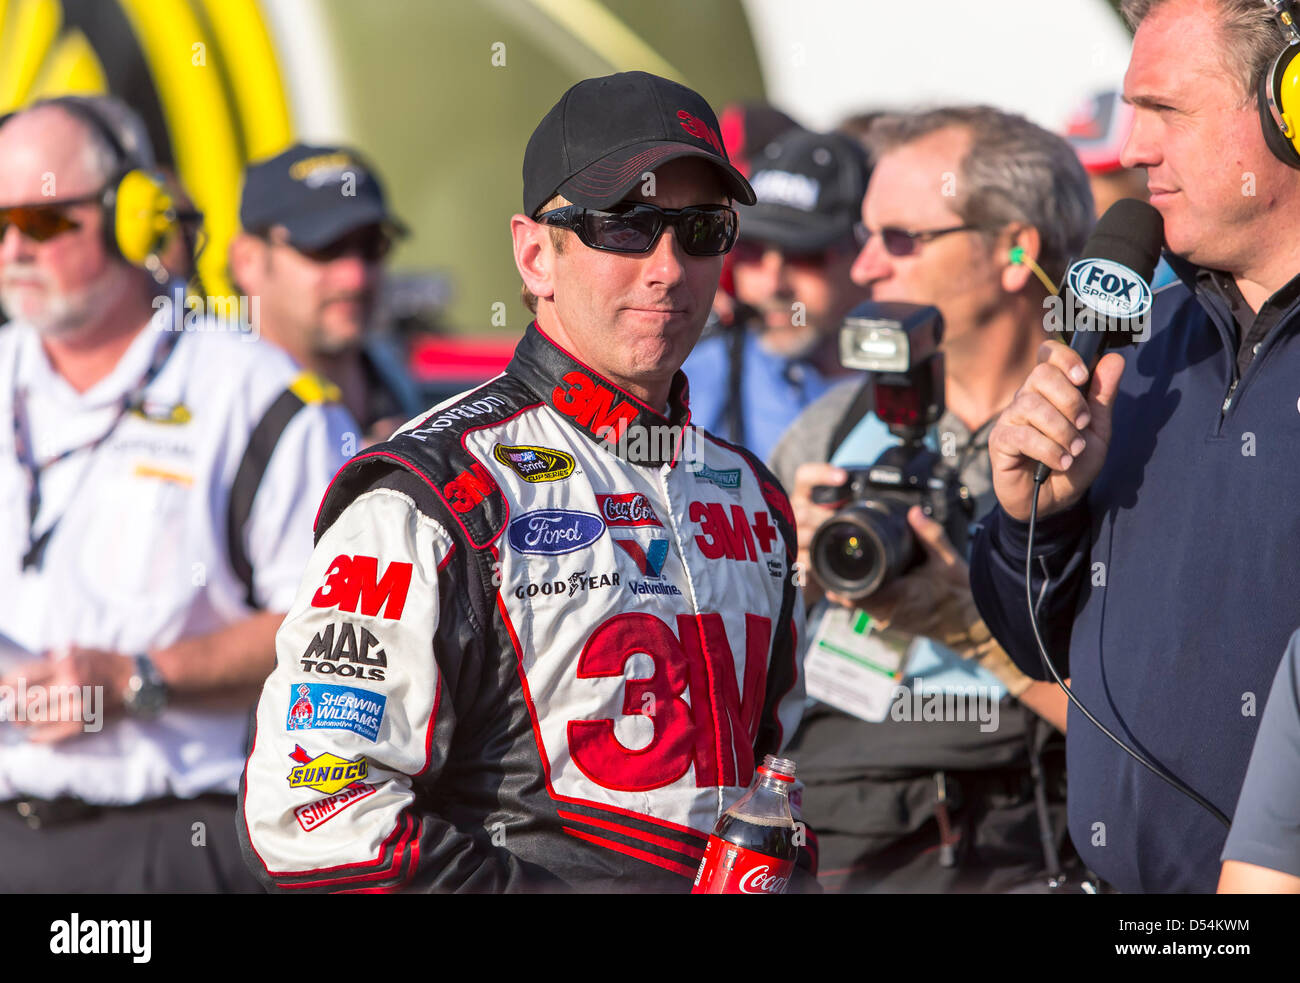 March 22, 2013 - Fontana, CA, U.S. - FONTANA, CA - MAR 22, 2013: Greg Biffle (16) prepares for a practice session for the Auto Club 400 at Auto Club Speedway in FONTANA, CA. Stock Photo